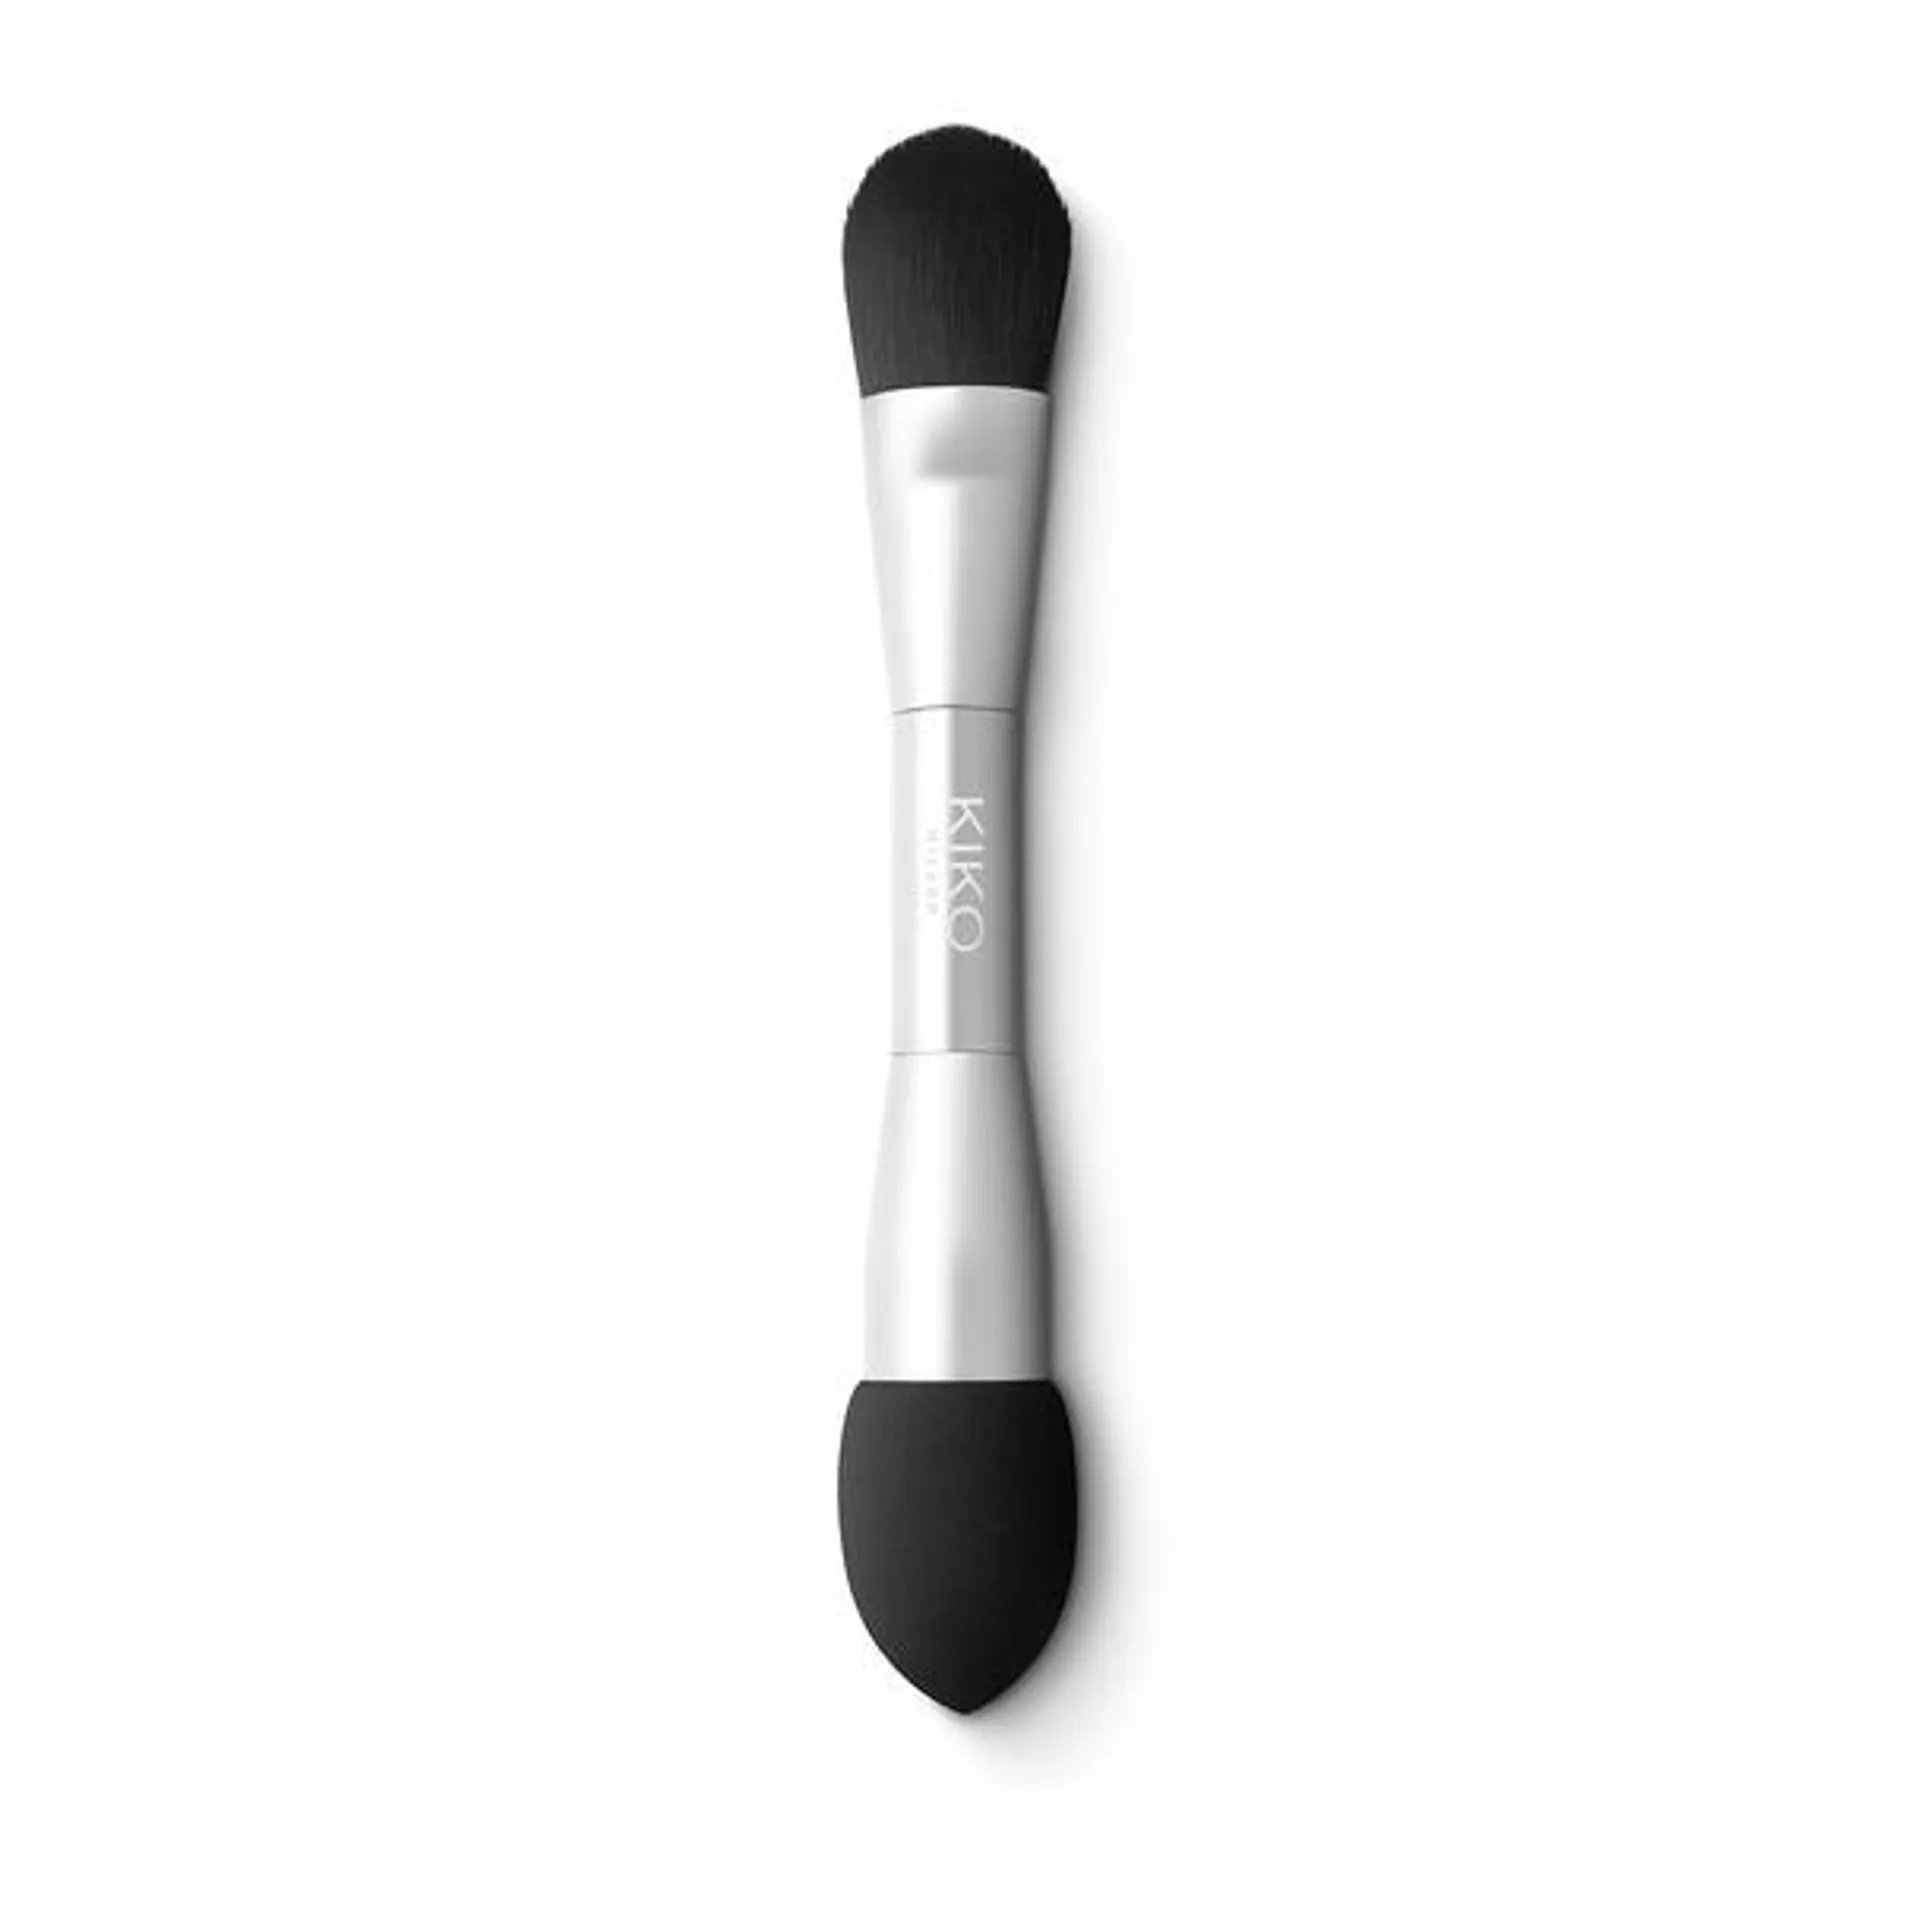 blue me 2-in-1 foundation brush